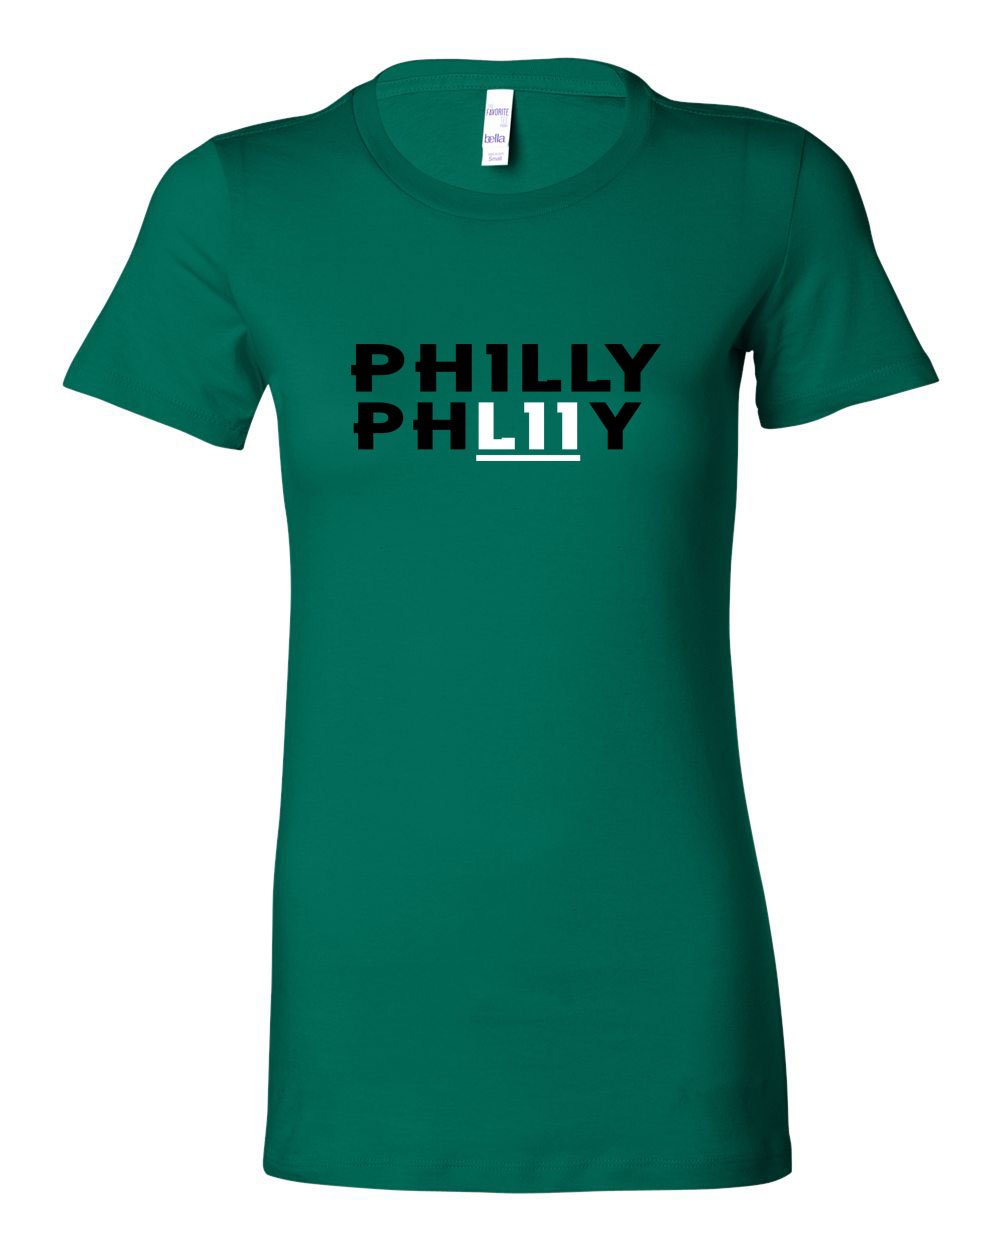 Philly Philly LADIES Junior-Fit T-Shirt